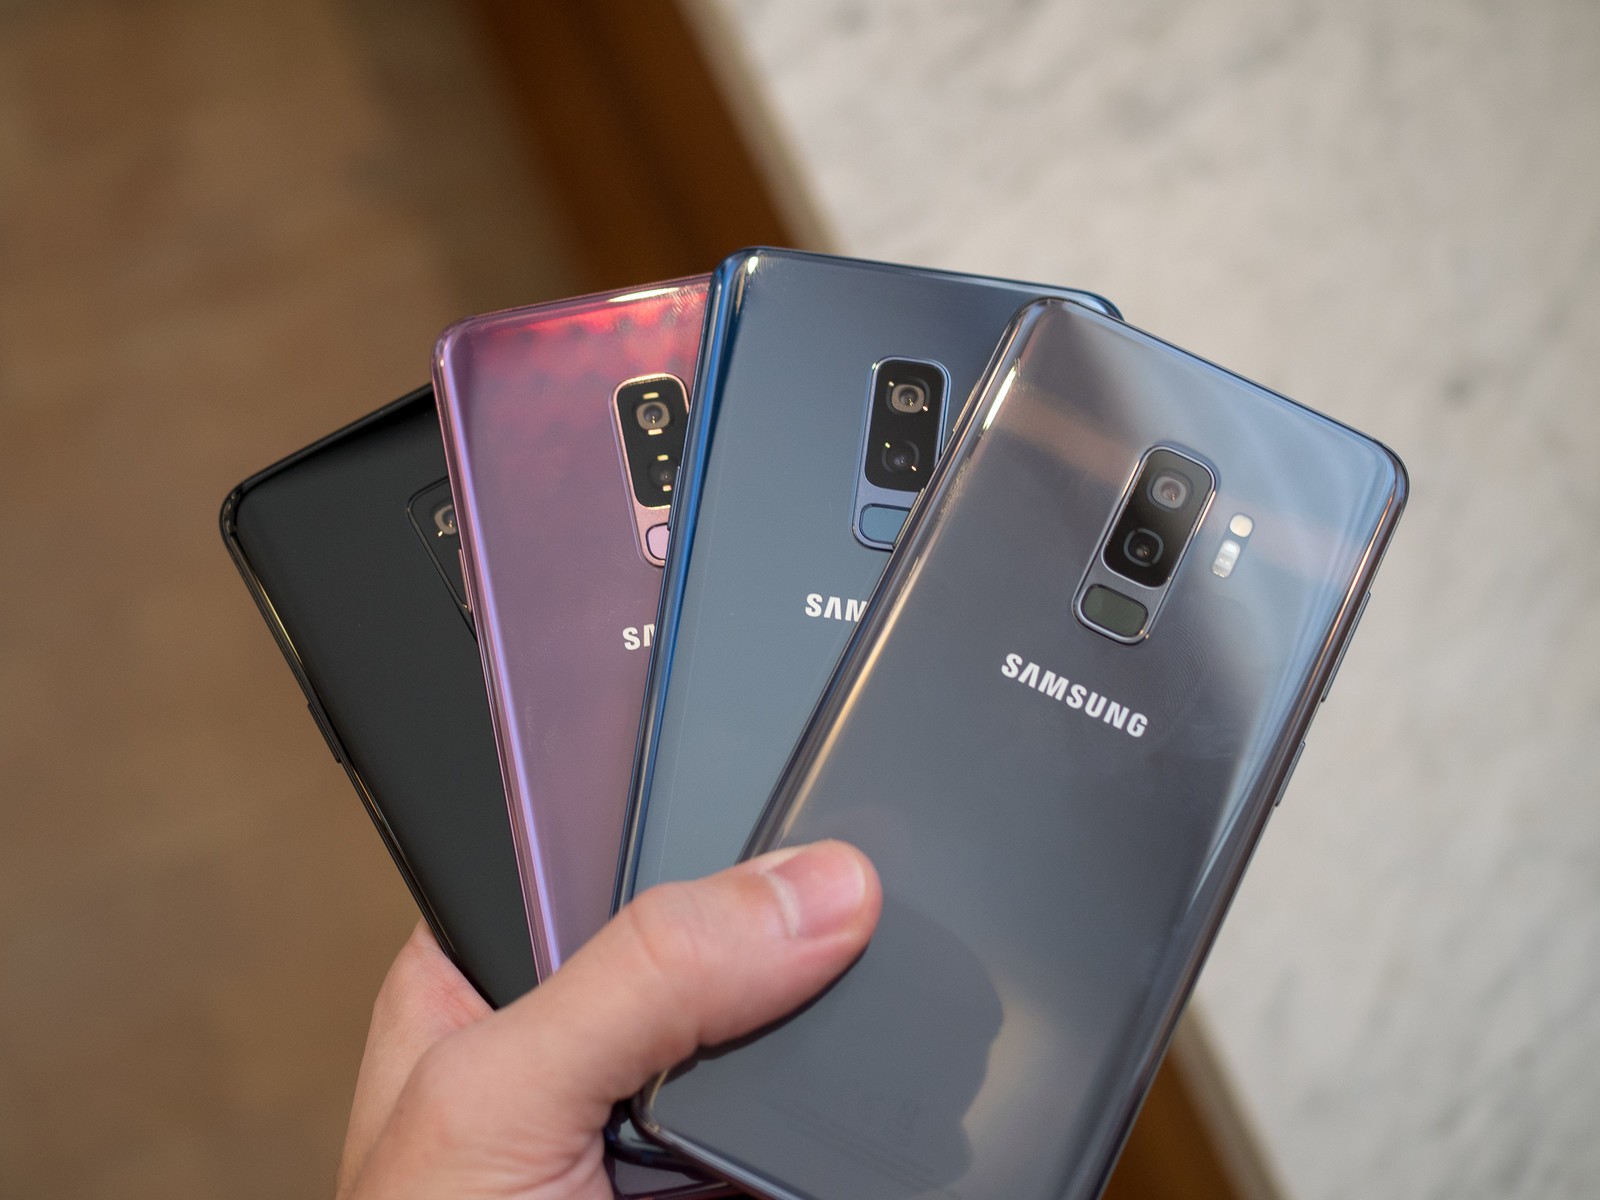 The Samsung Galaxy S9 and S9+ are billed to receive the One UI 2.1